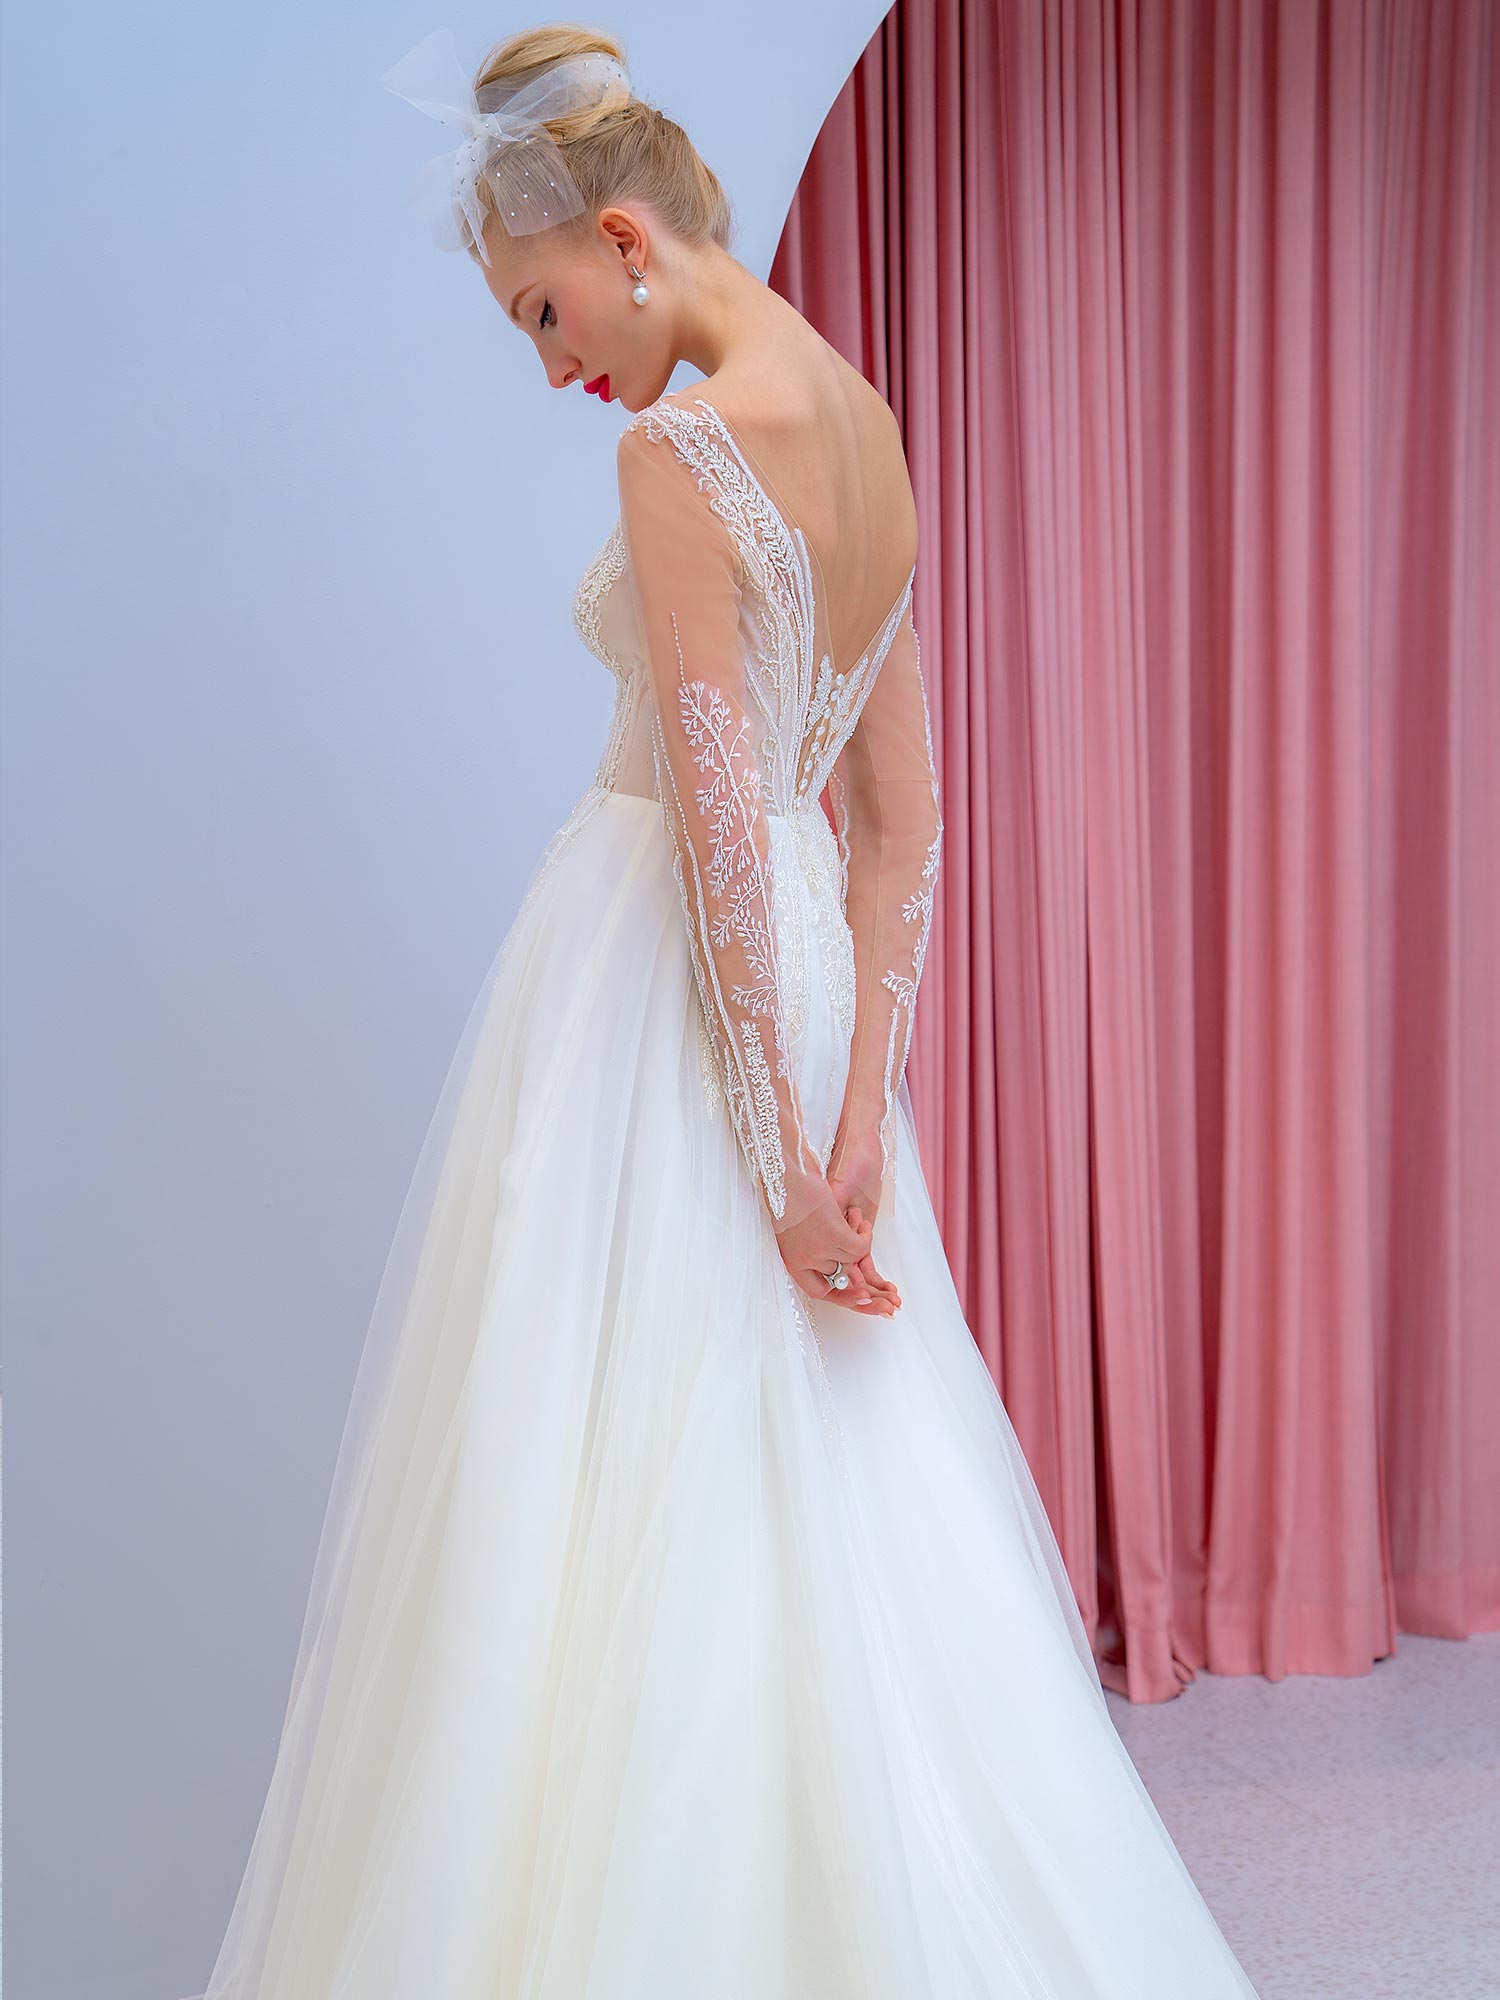 Style #2204L, long-sleeve A-line wedding dress with floral embroidery, available in ivory